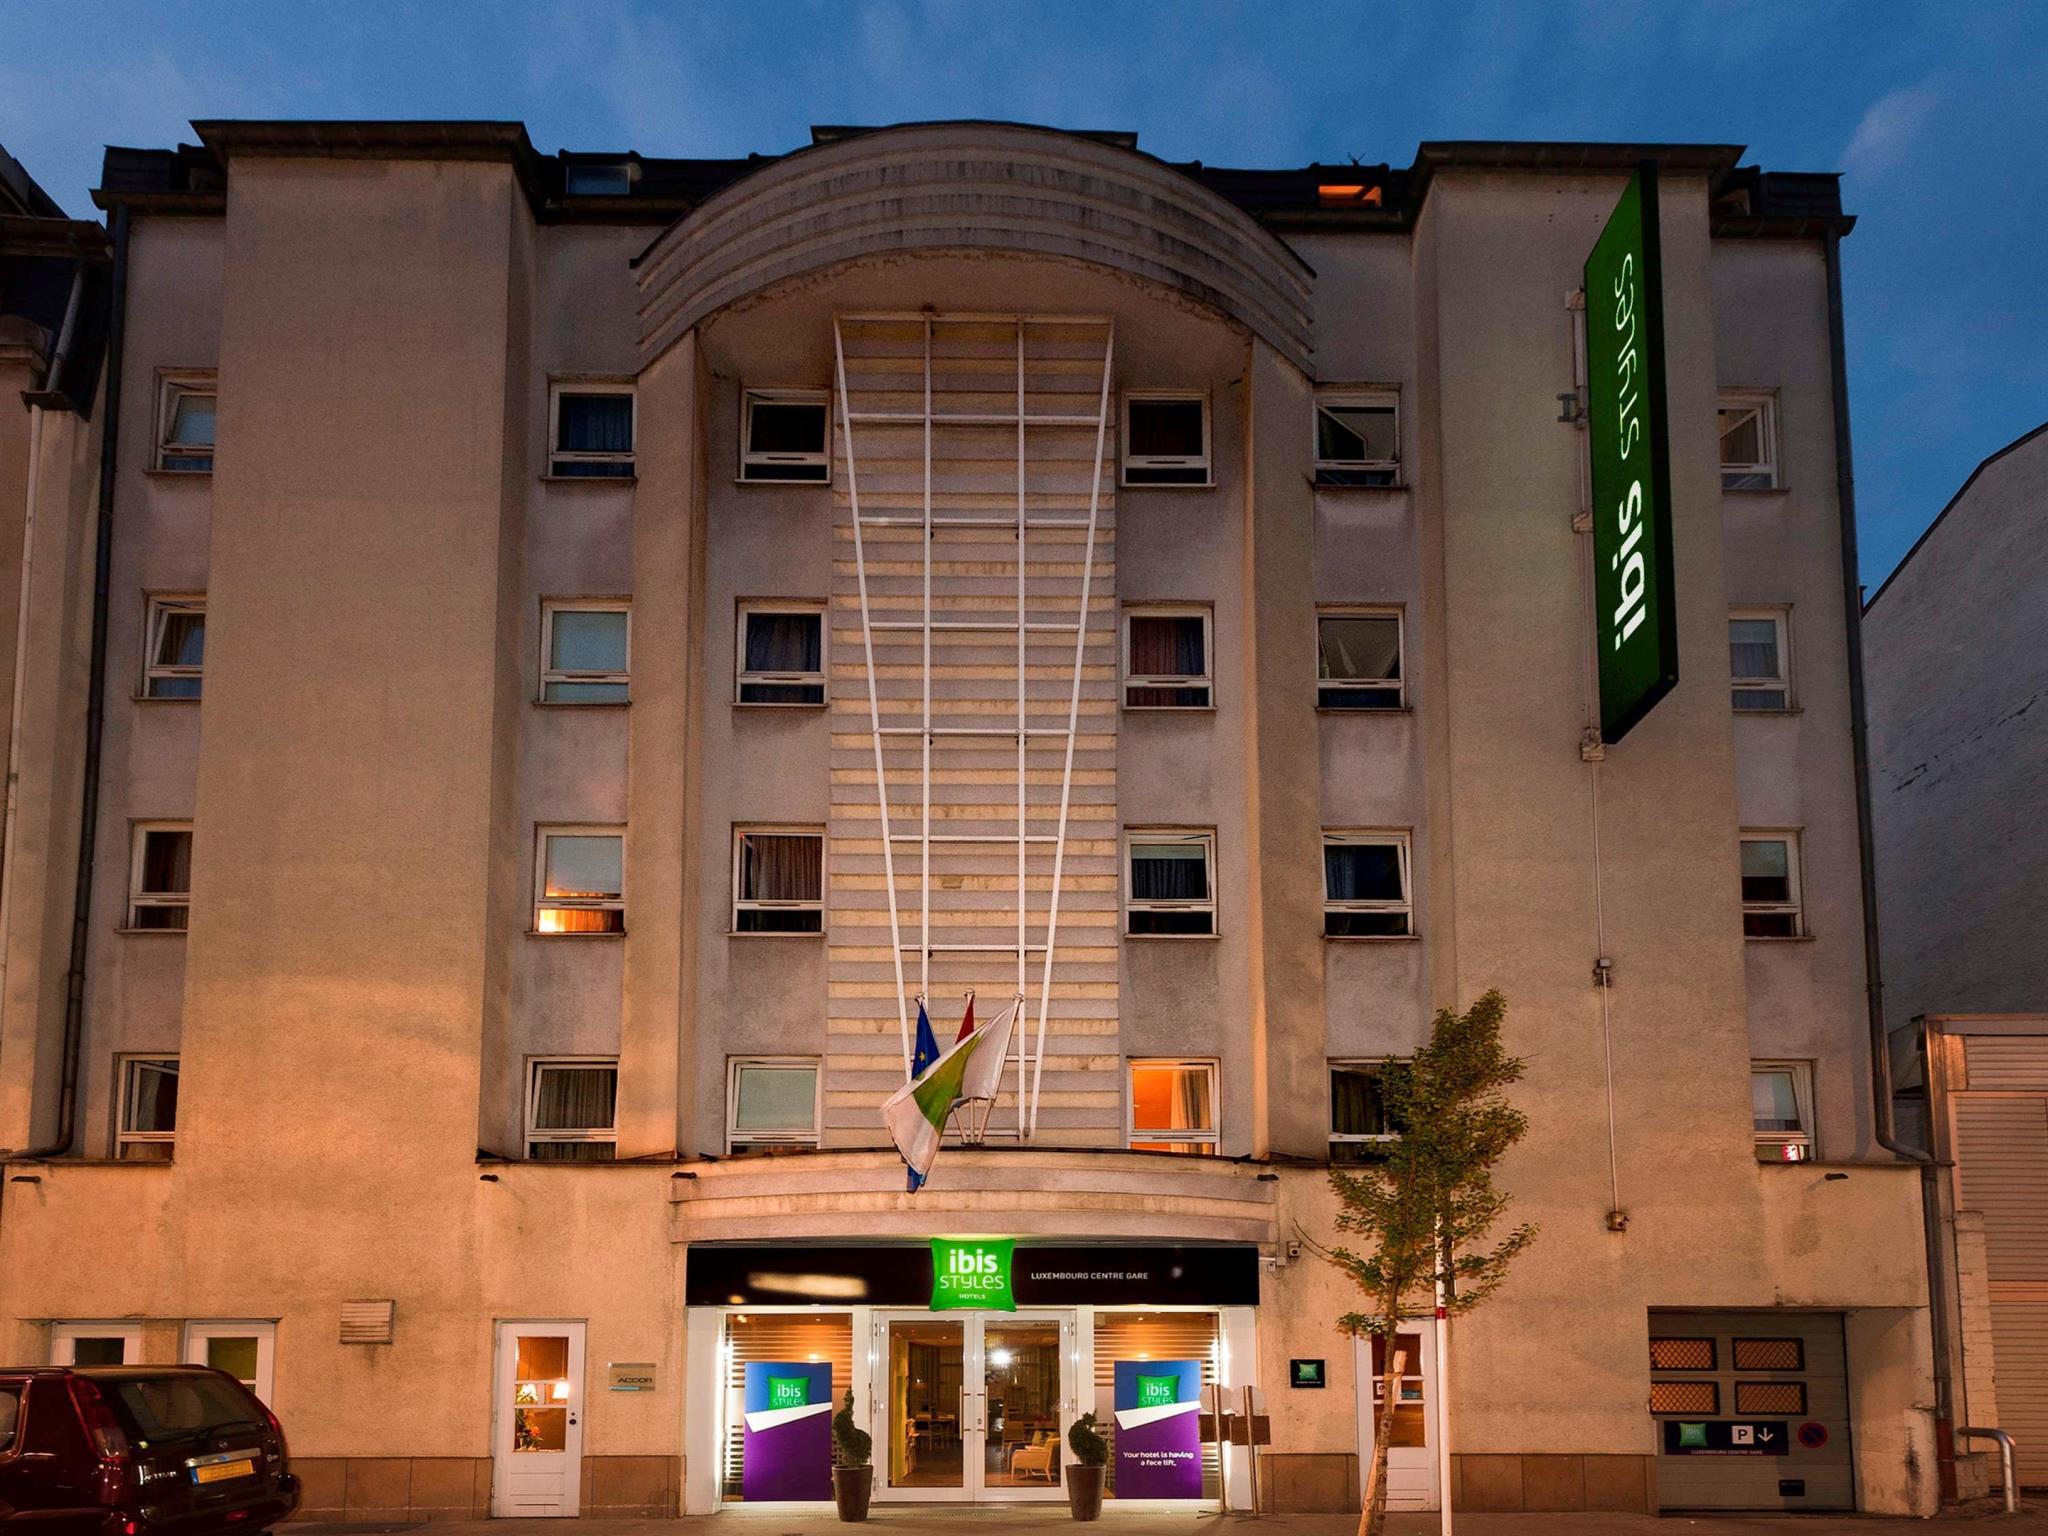 Ibis Styles Luxembourg Centre Gare 写真